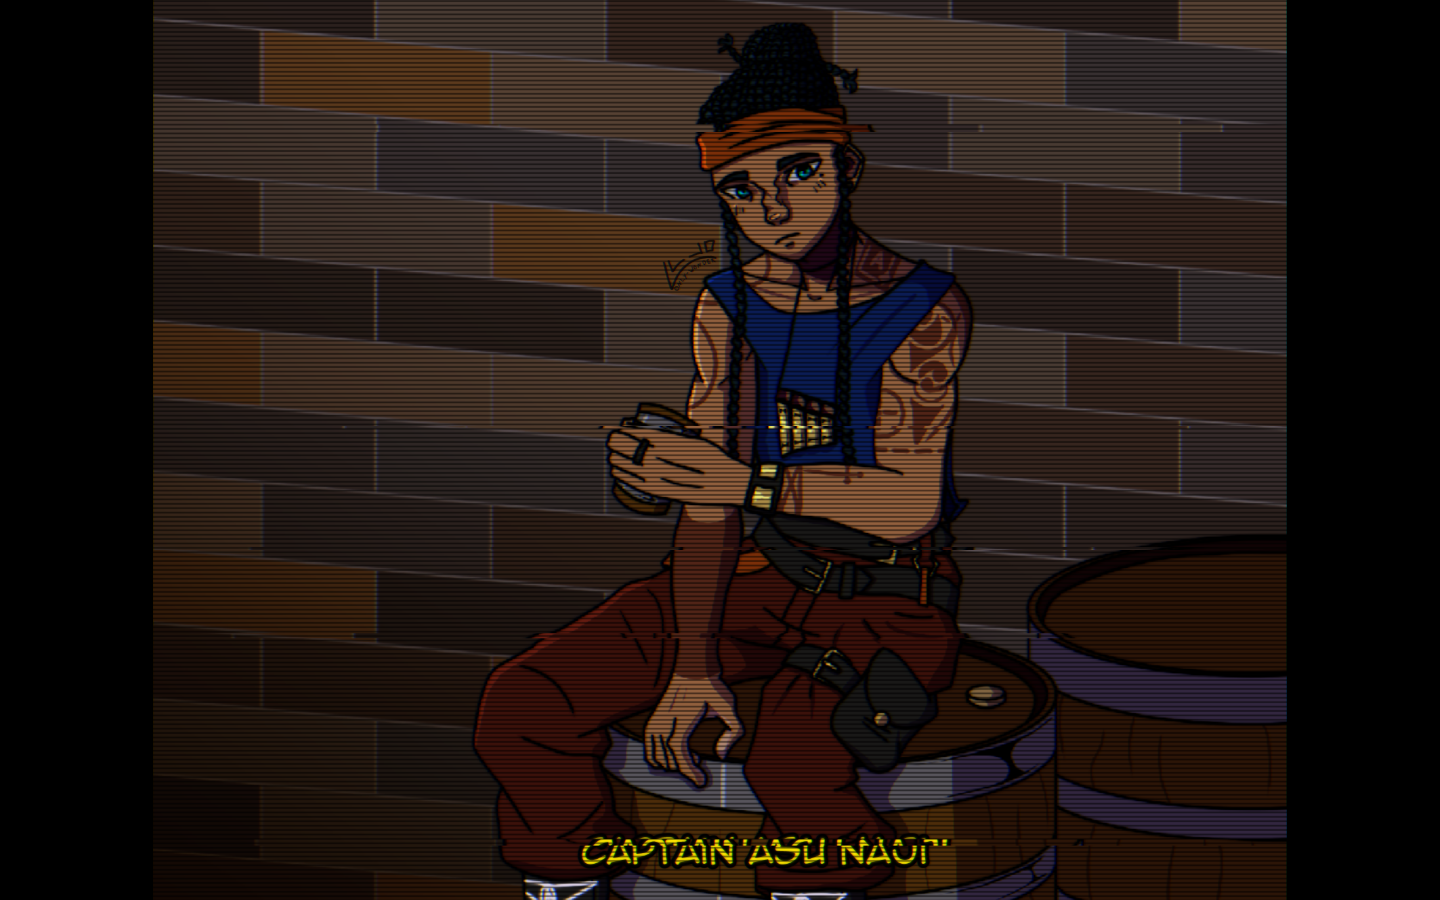 A drawing of Asu, a tan-skinned man with blue-black braids tied in a bun. He has tattoos on his arms and is holding a small wooden cup. He is sitting on a barrel with another barrel in the background. There is a yellow caption at the bottom that reads 'Captain Asu Naji'. The image appears to be a VHS screenshot, complete with black borders on the sides.